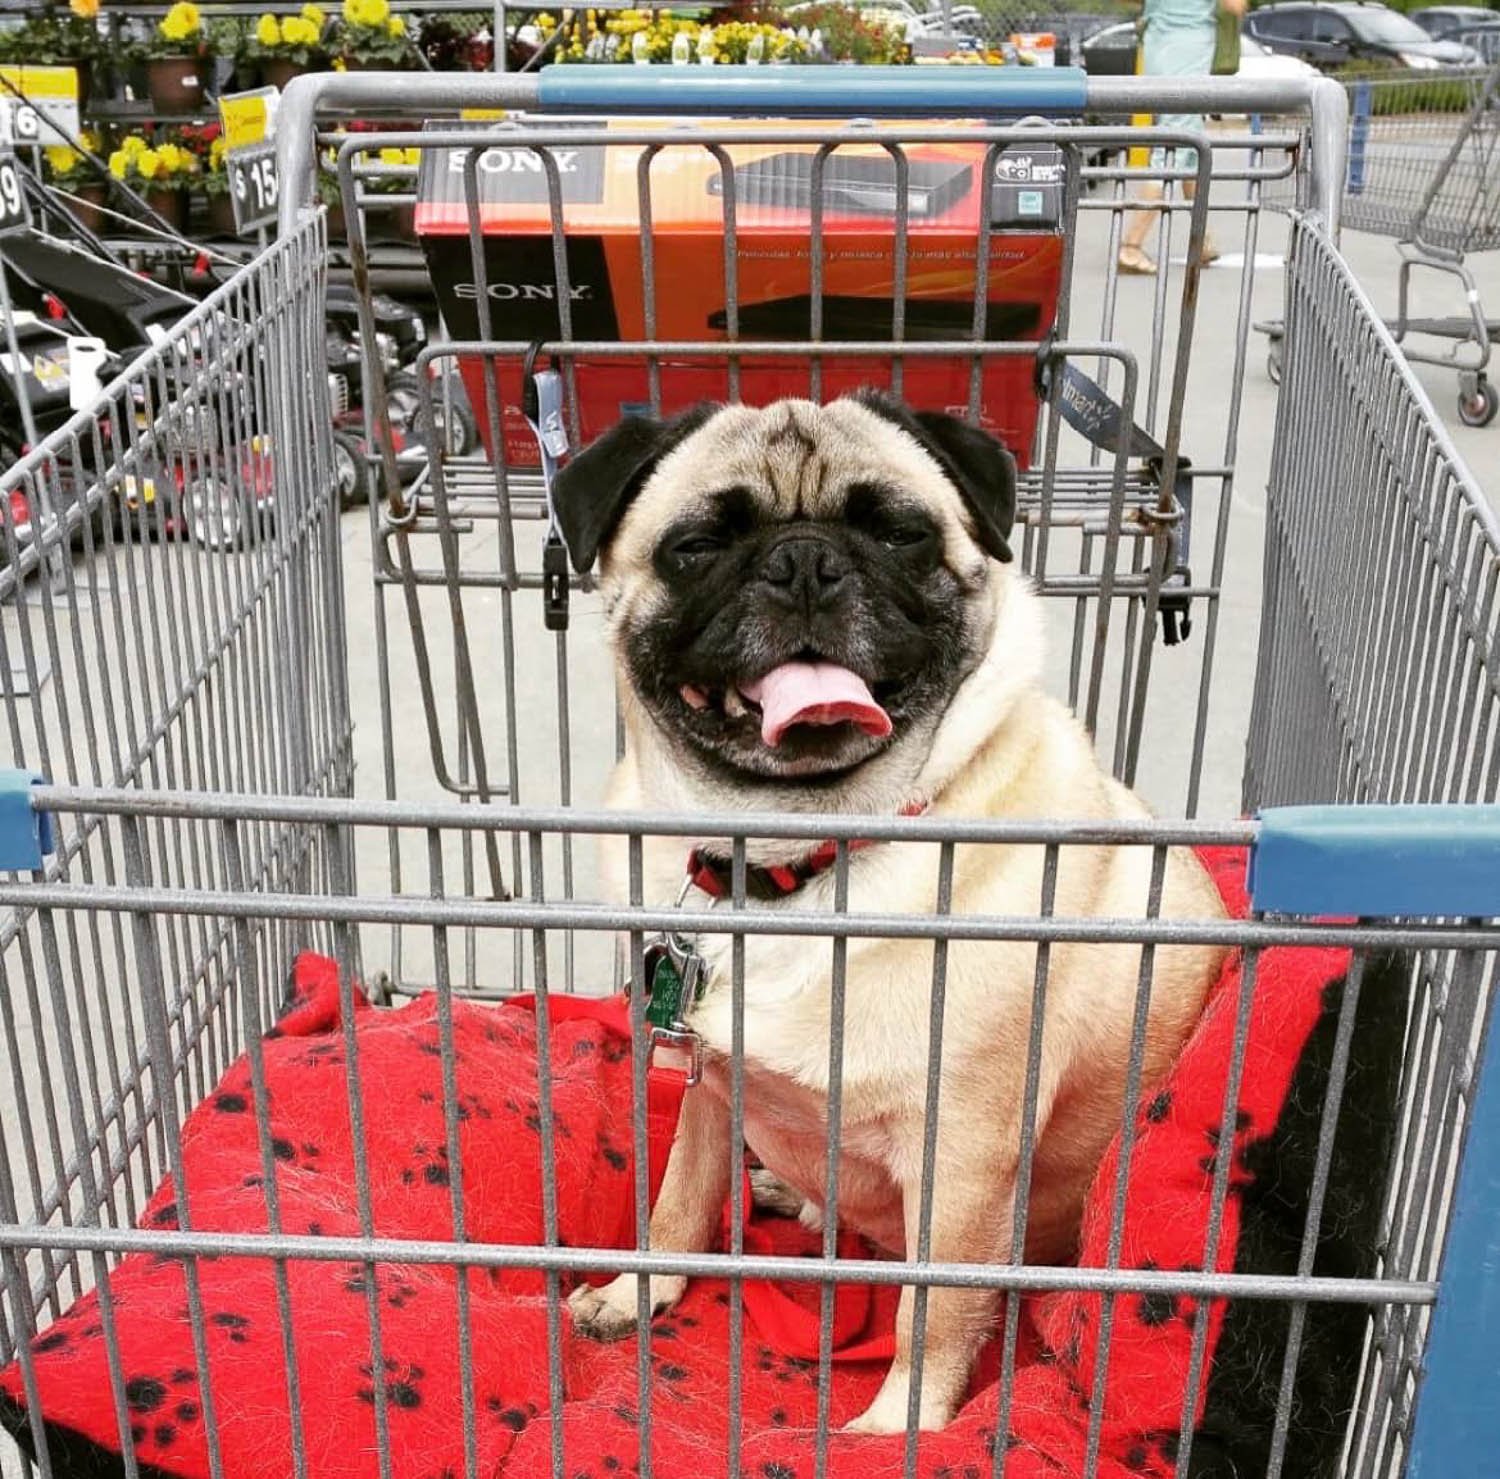 A cream colored pug dog with a black face sitting on a red pillow in a shopping trolley